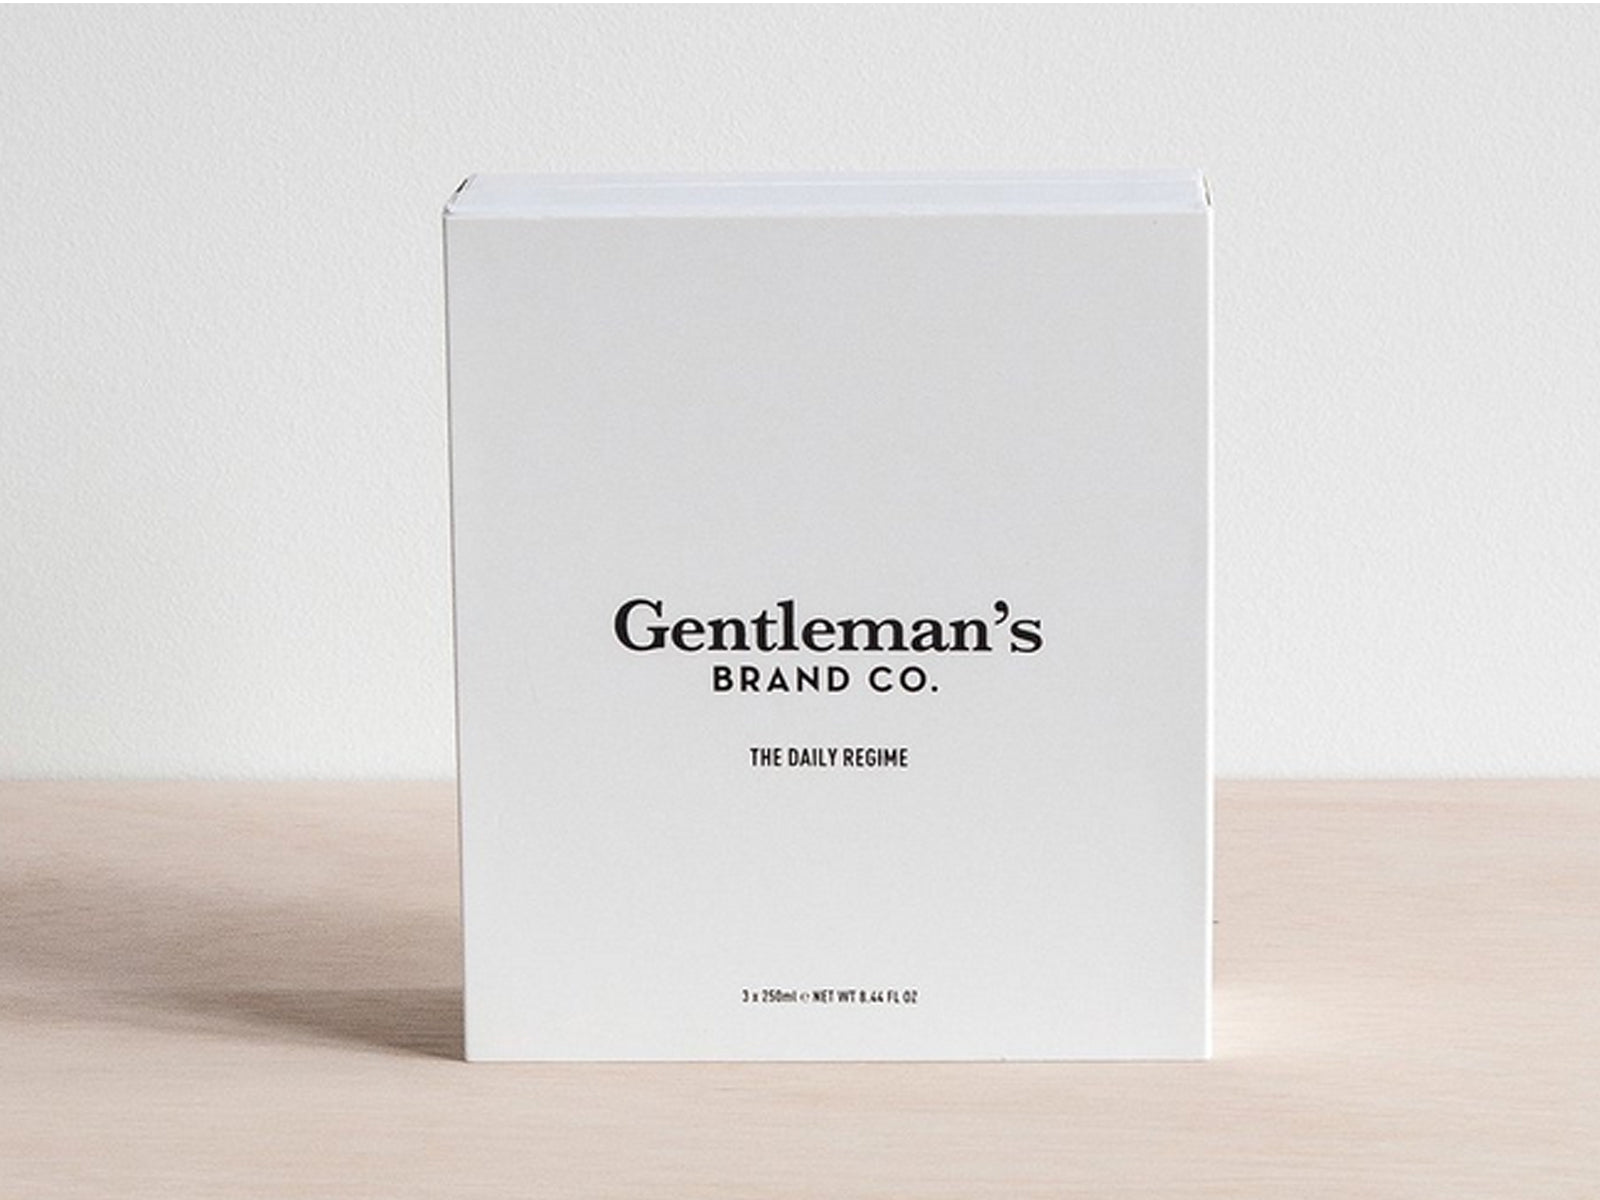 The Daily Regime by Gentlemen's Brand Co